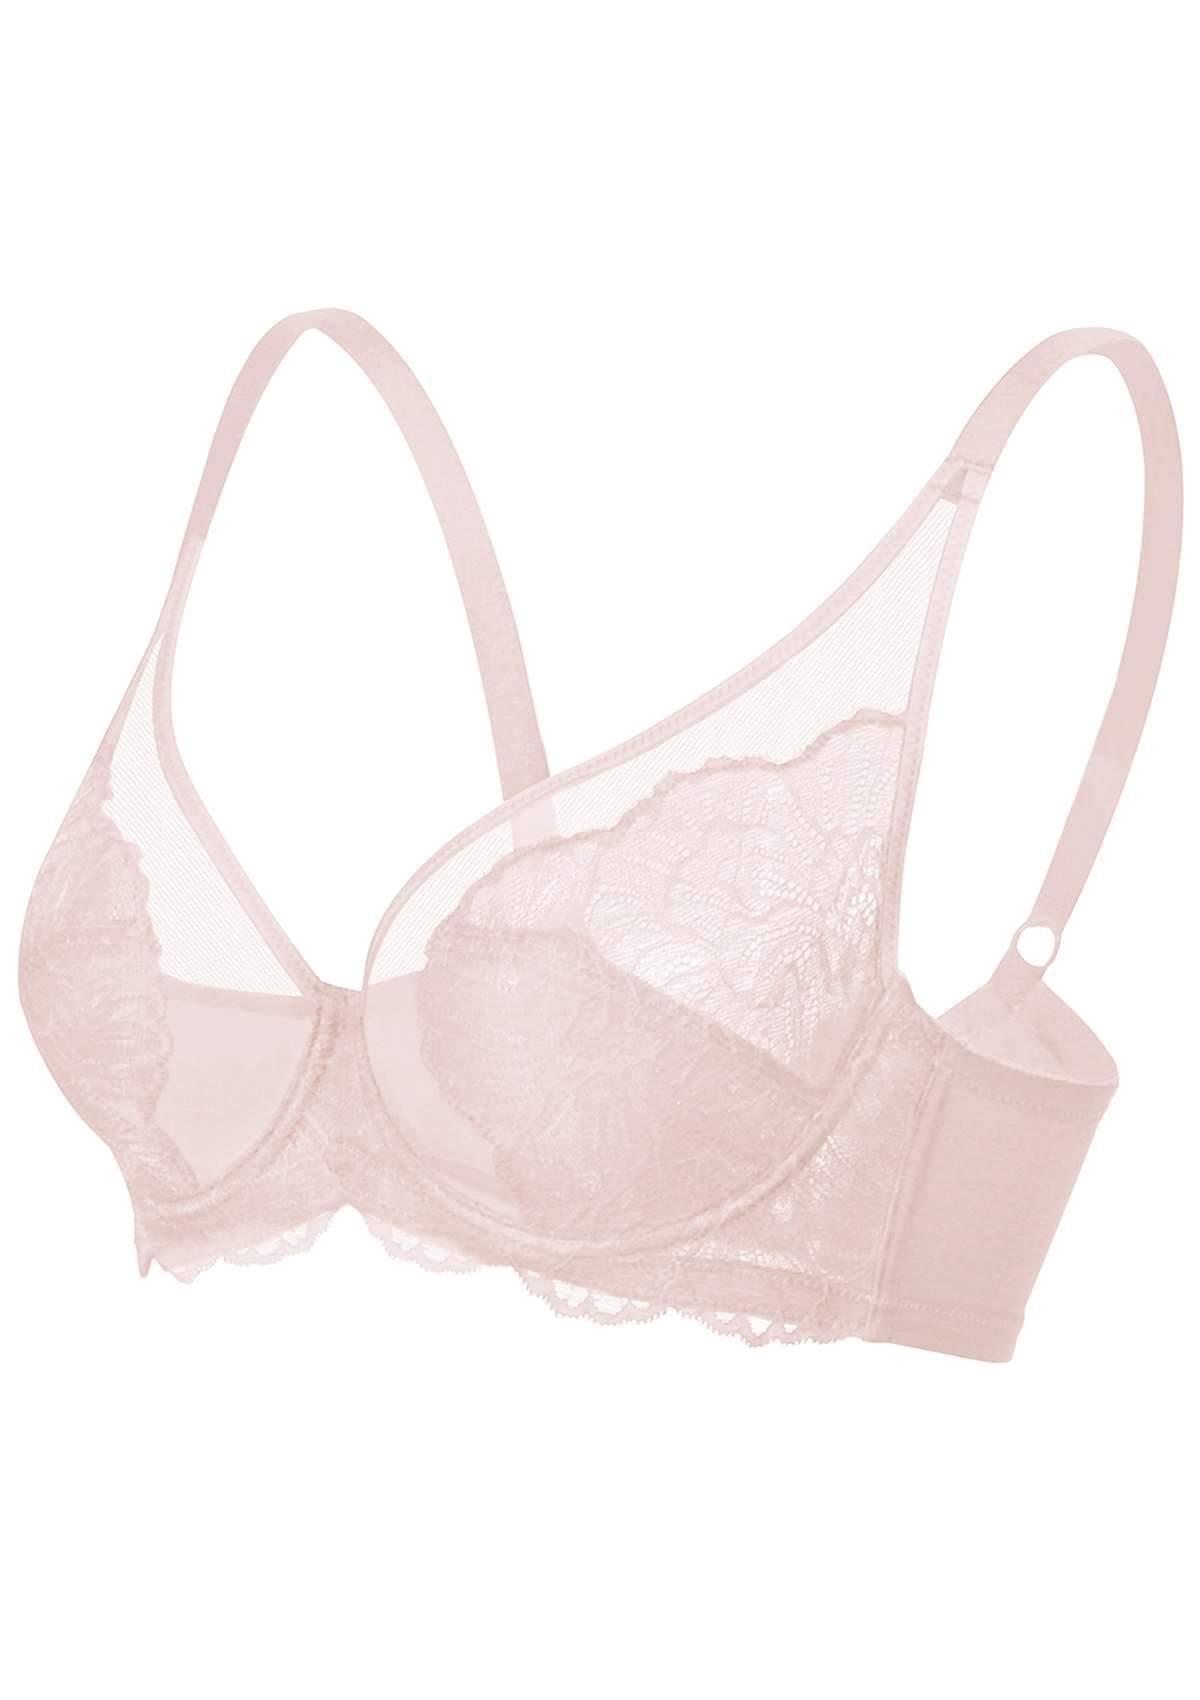 HSIA Blossom Lace Bra And Panties Set: Best Bra For Large Busts - Dark Pink / 44 / G